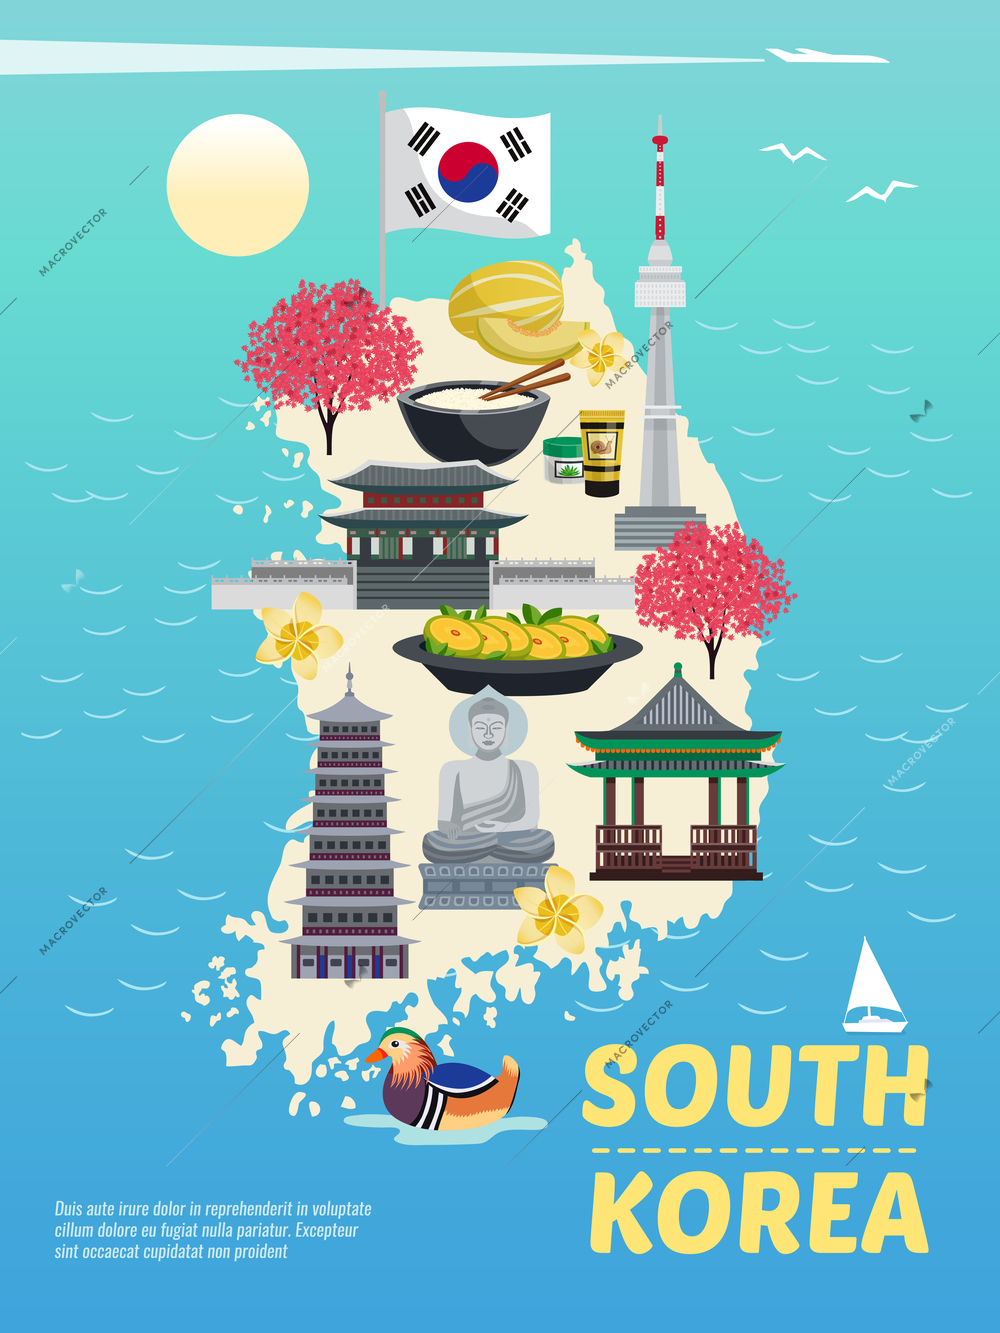 South korea tourism vertical poster composition with doodle images on island silhouette with sea and text vector illustration